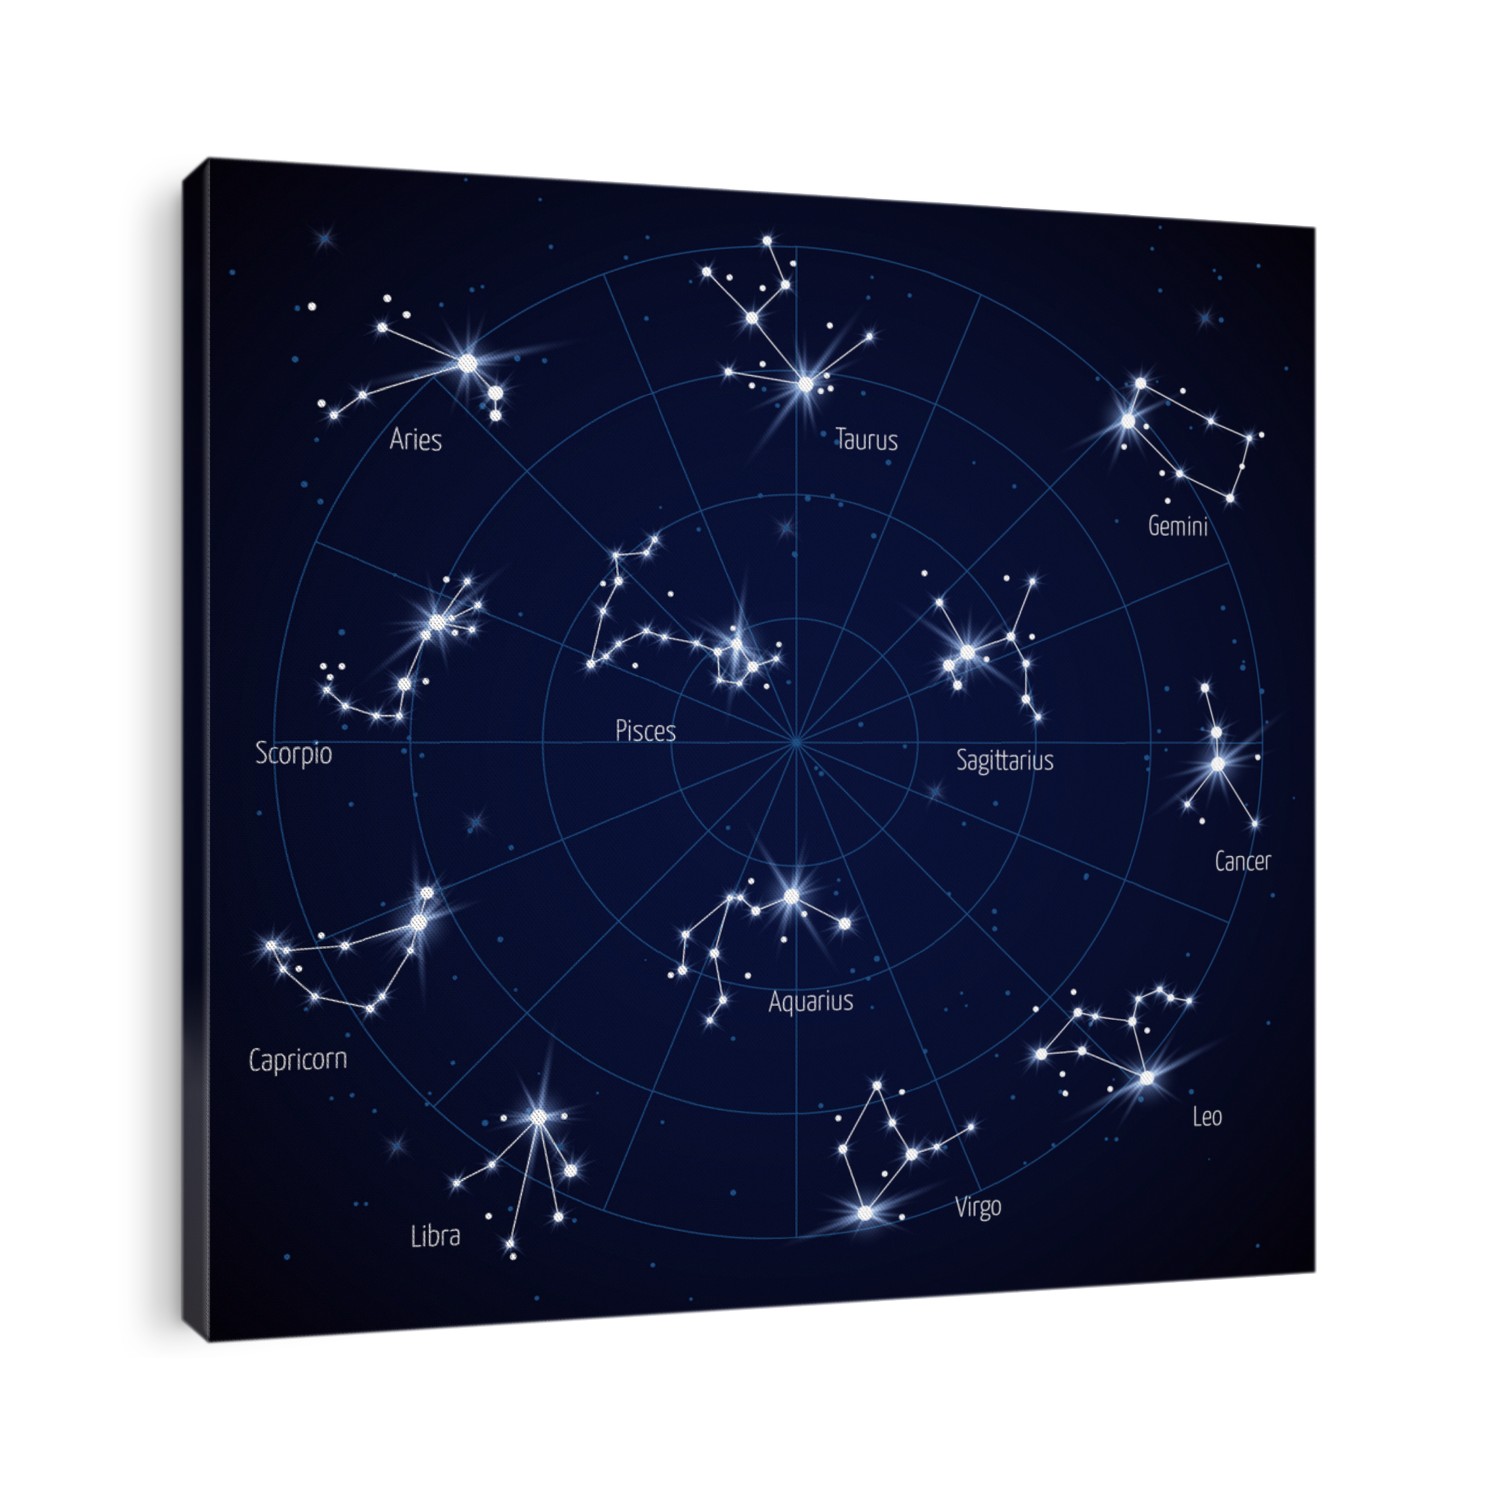  sky star map with constellations stars. Set of constellation in space night illustration